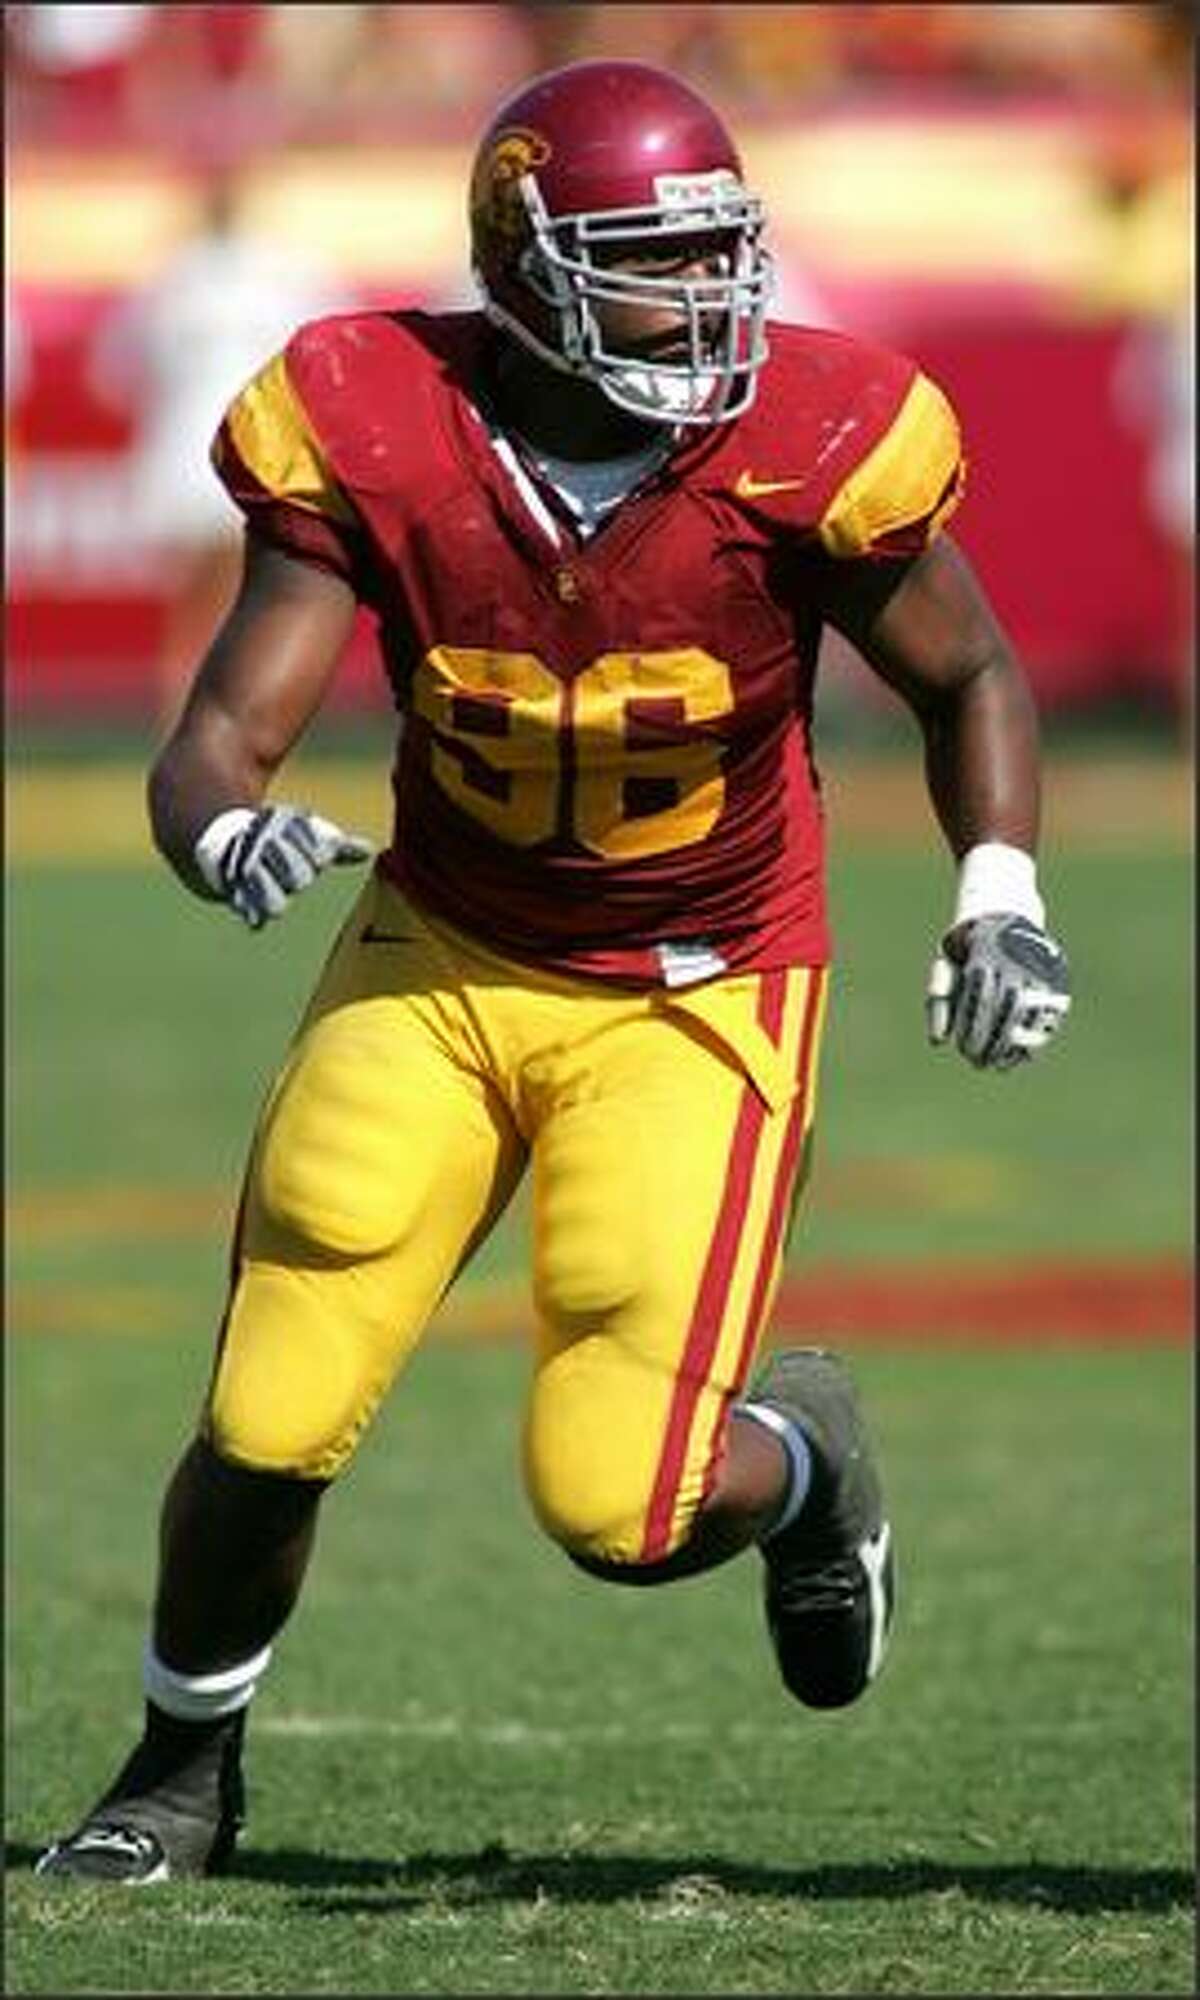 In this 2007 photo released by the University of Southern California, USC's Lawrence Jackson is shown in action in Pasadena, Calif. Jackson was selected Saturday in the first round (28th overall) of the NFL draft by the Seattle Seahawks.